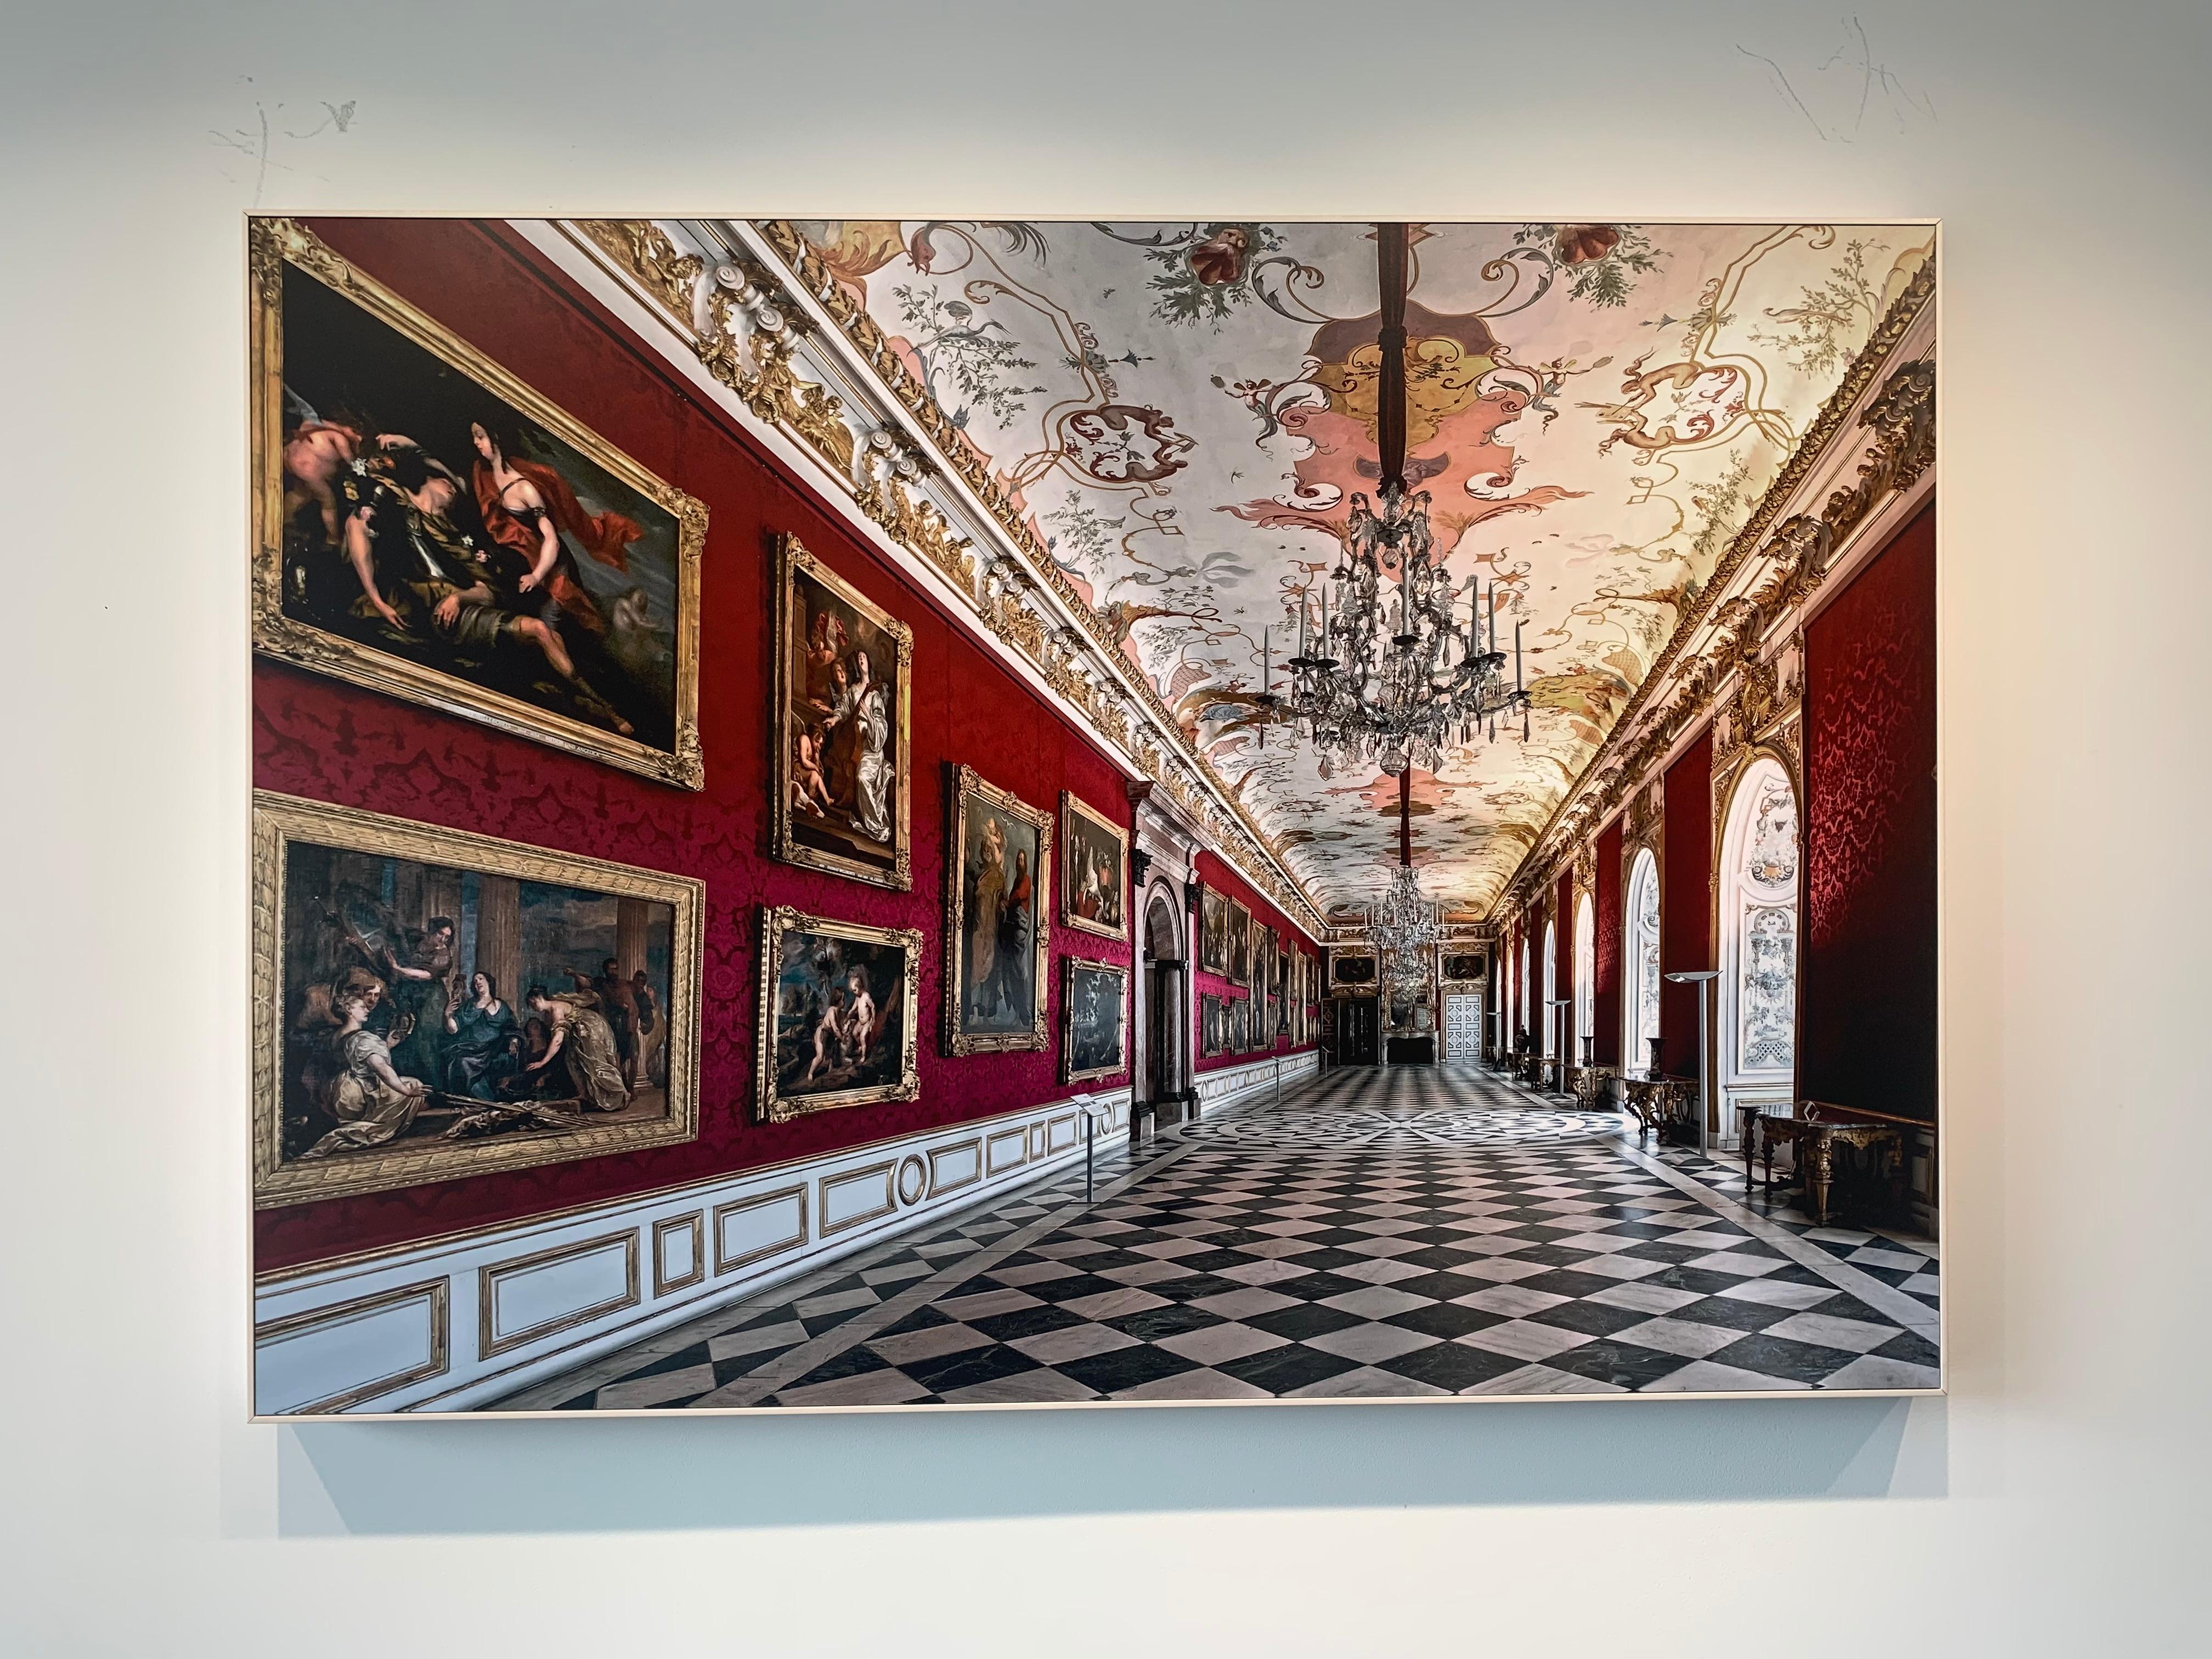 Royal Red is a limited edition photography artwork of 10 originals, printed in high definition as a diasec - backed by an aluminium plate, and printed on Fuji Crystal photopaper and then merged with an acrylic glass, this artwork floats elegantly on